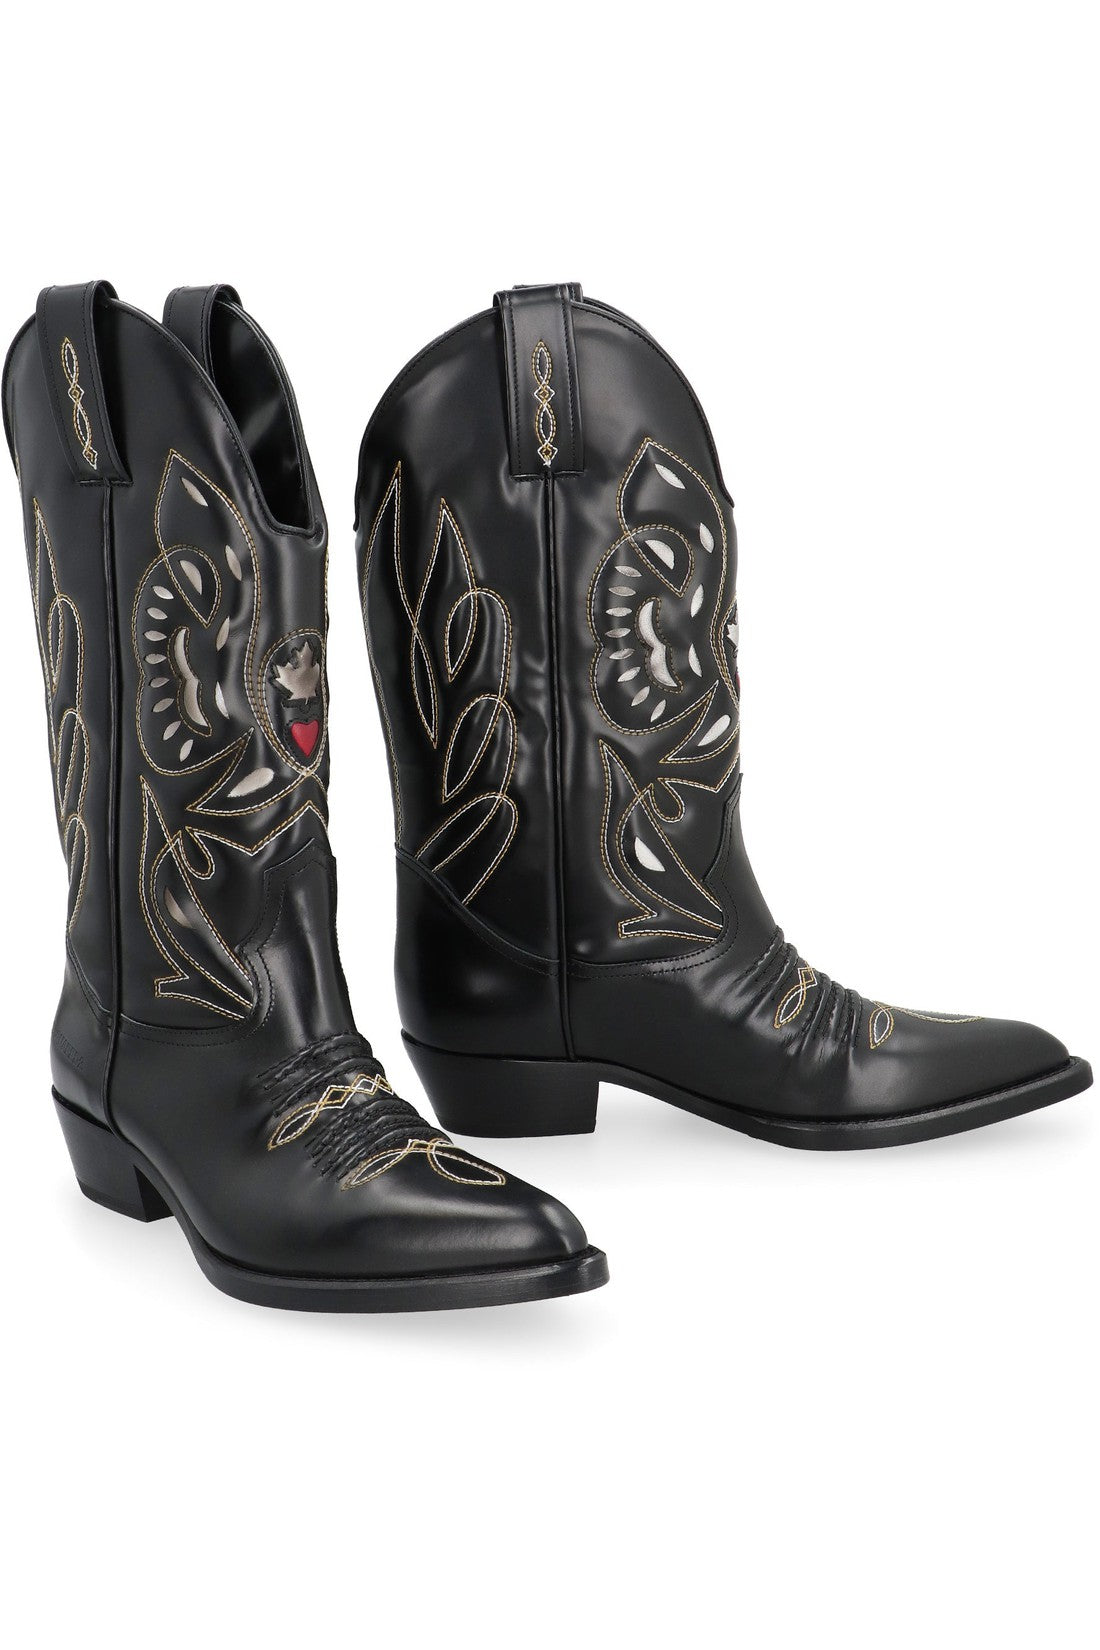 Dsquared2-OUTLET-SALE-Western-style boots-ARCHIVIST